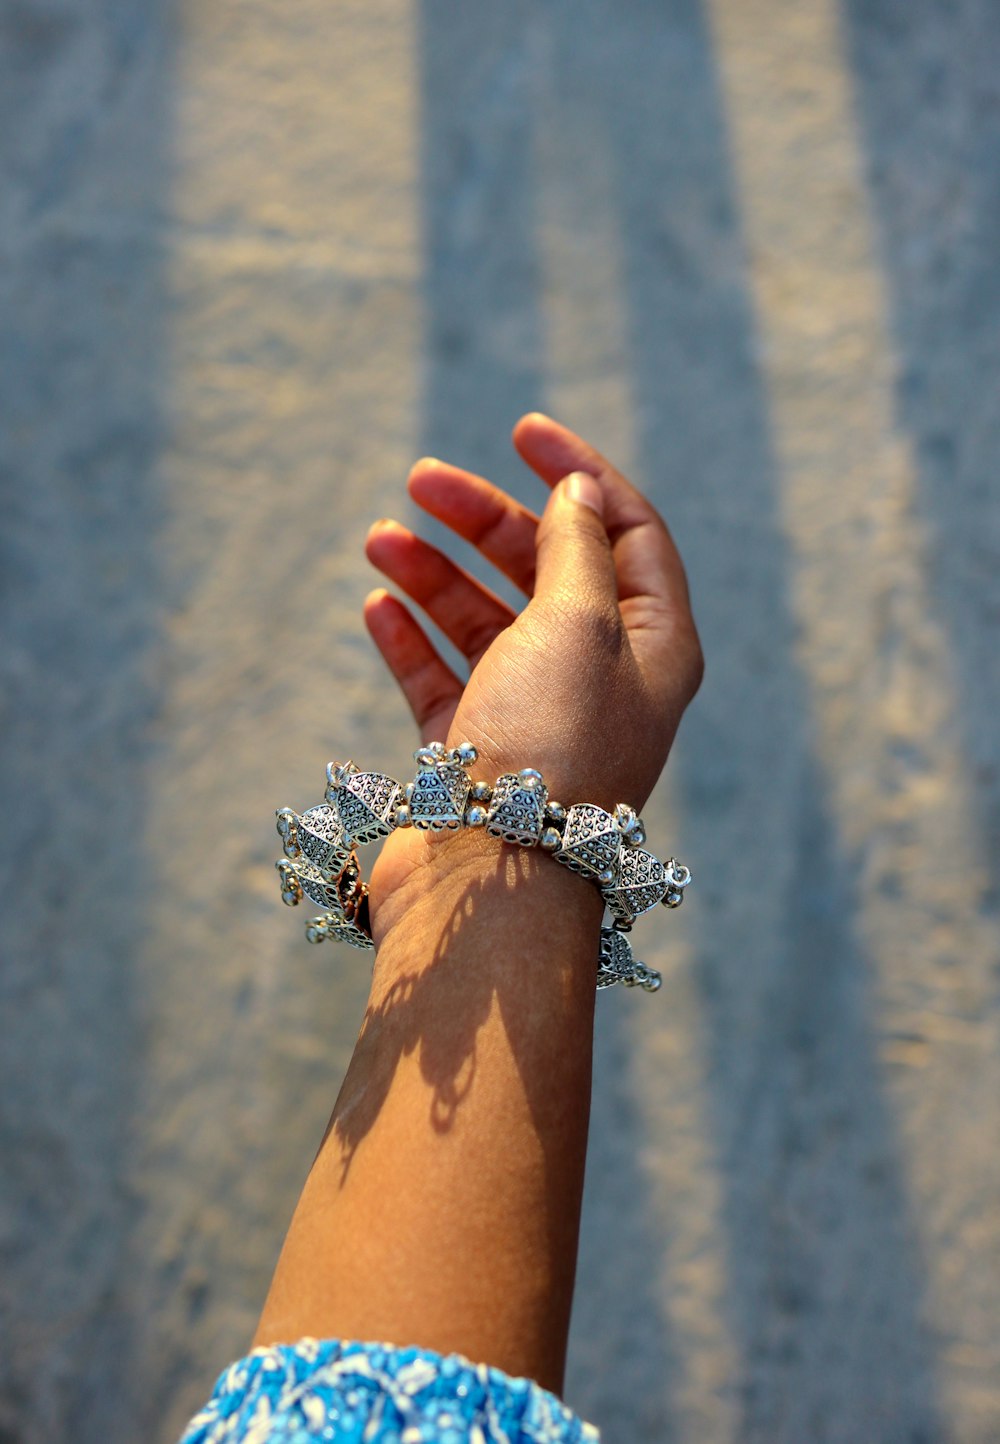 a person's arm with a bracelet on it